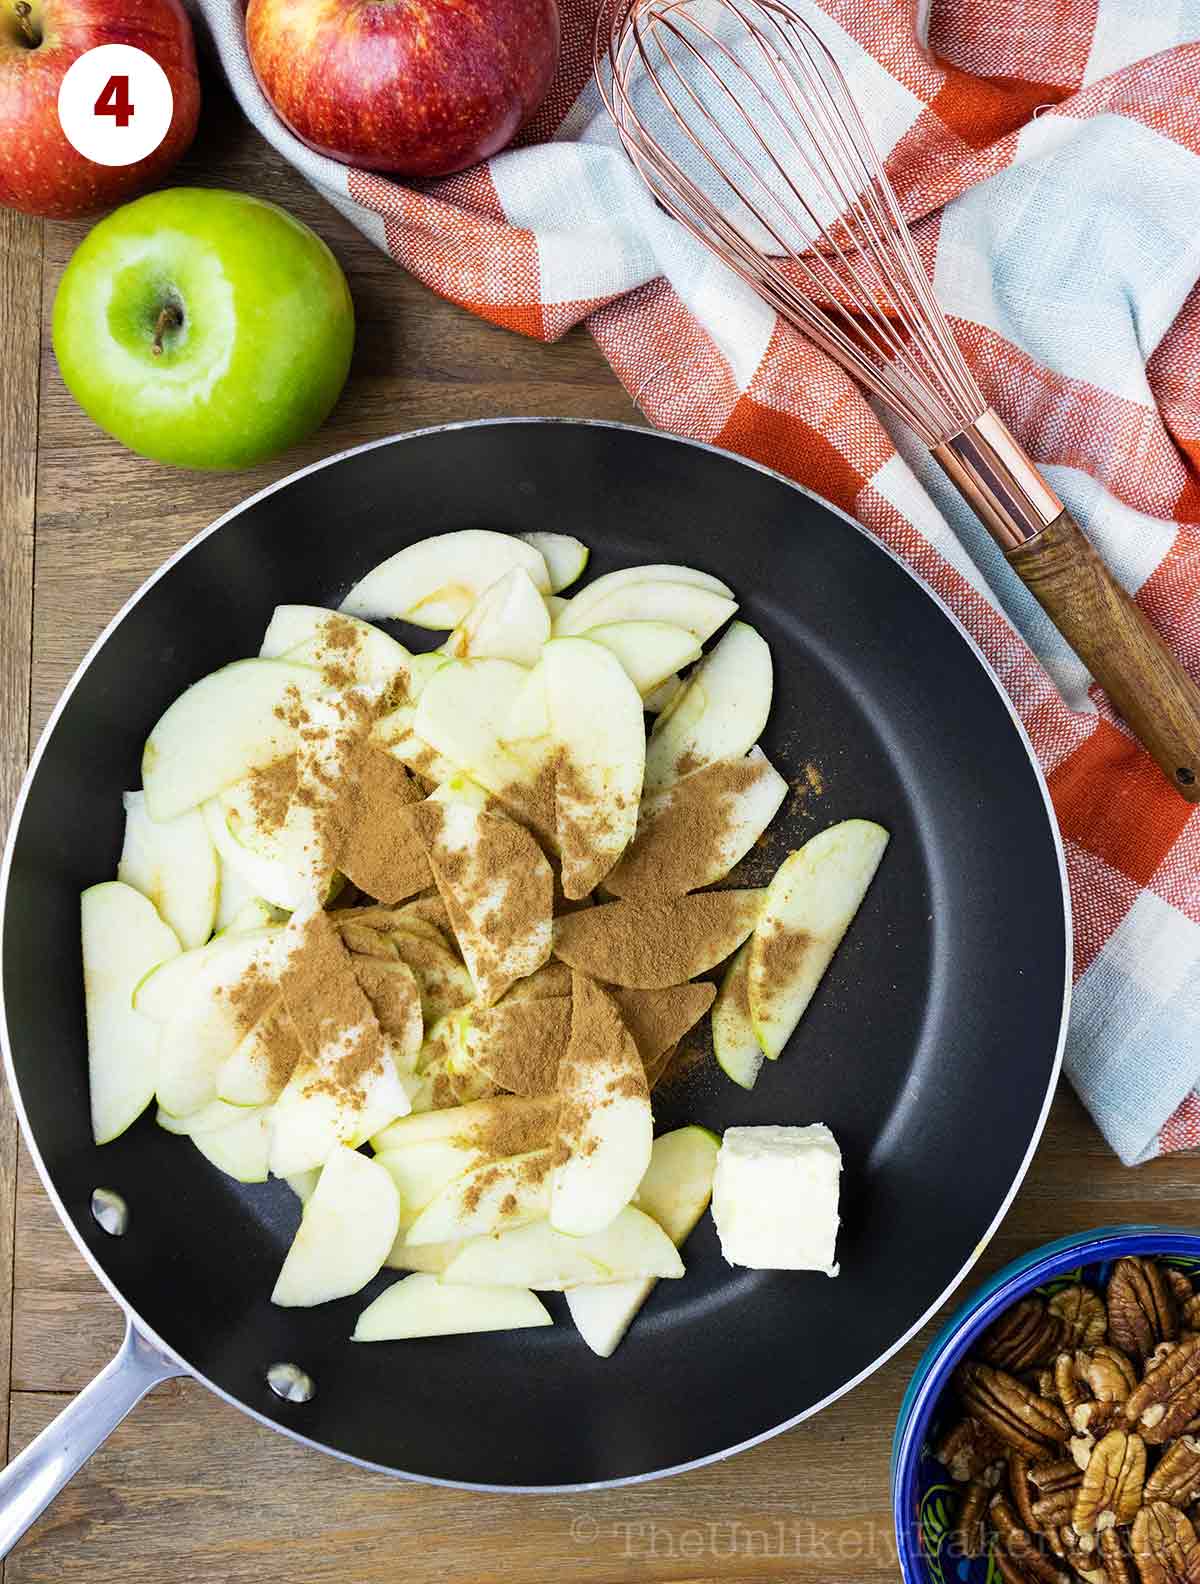 Sliced apples and cinnamon in a pan.